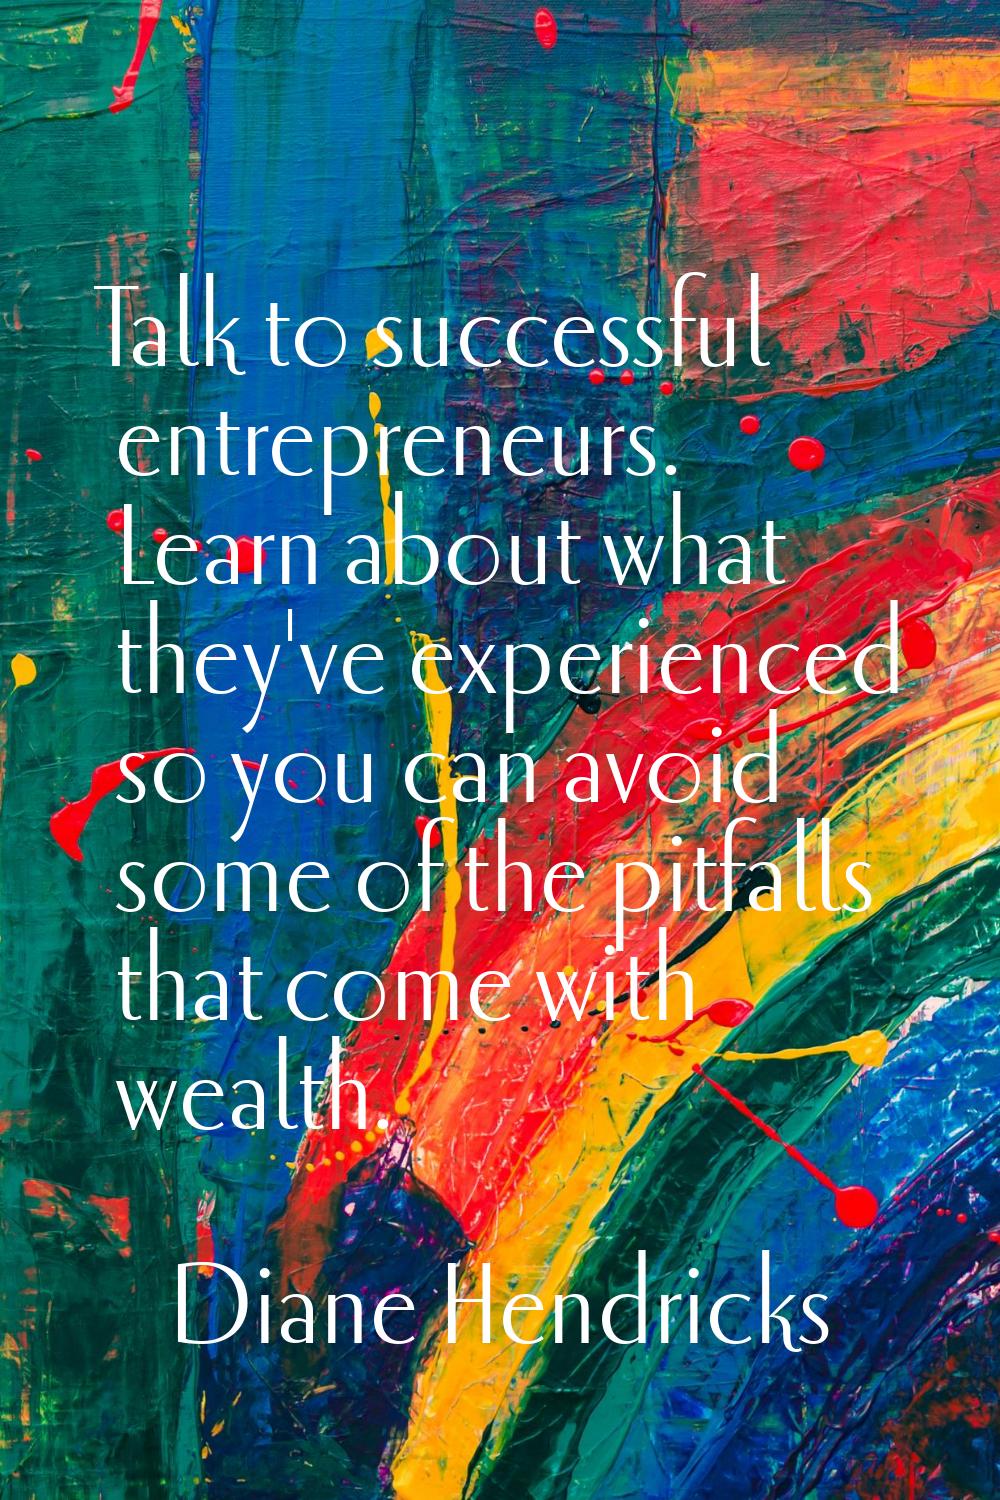 Talk to successful entrepreneurs. Learn about what they've experienced so you can avoid some of the